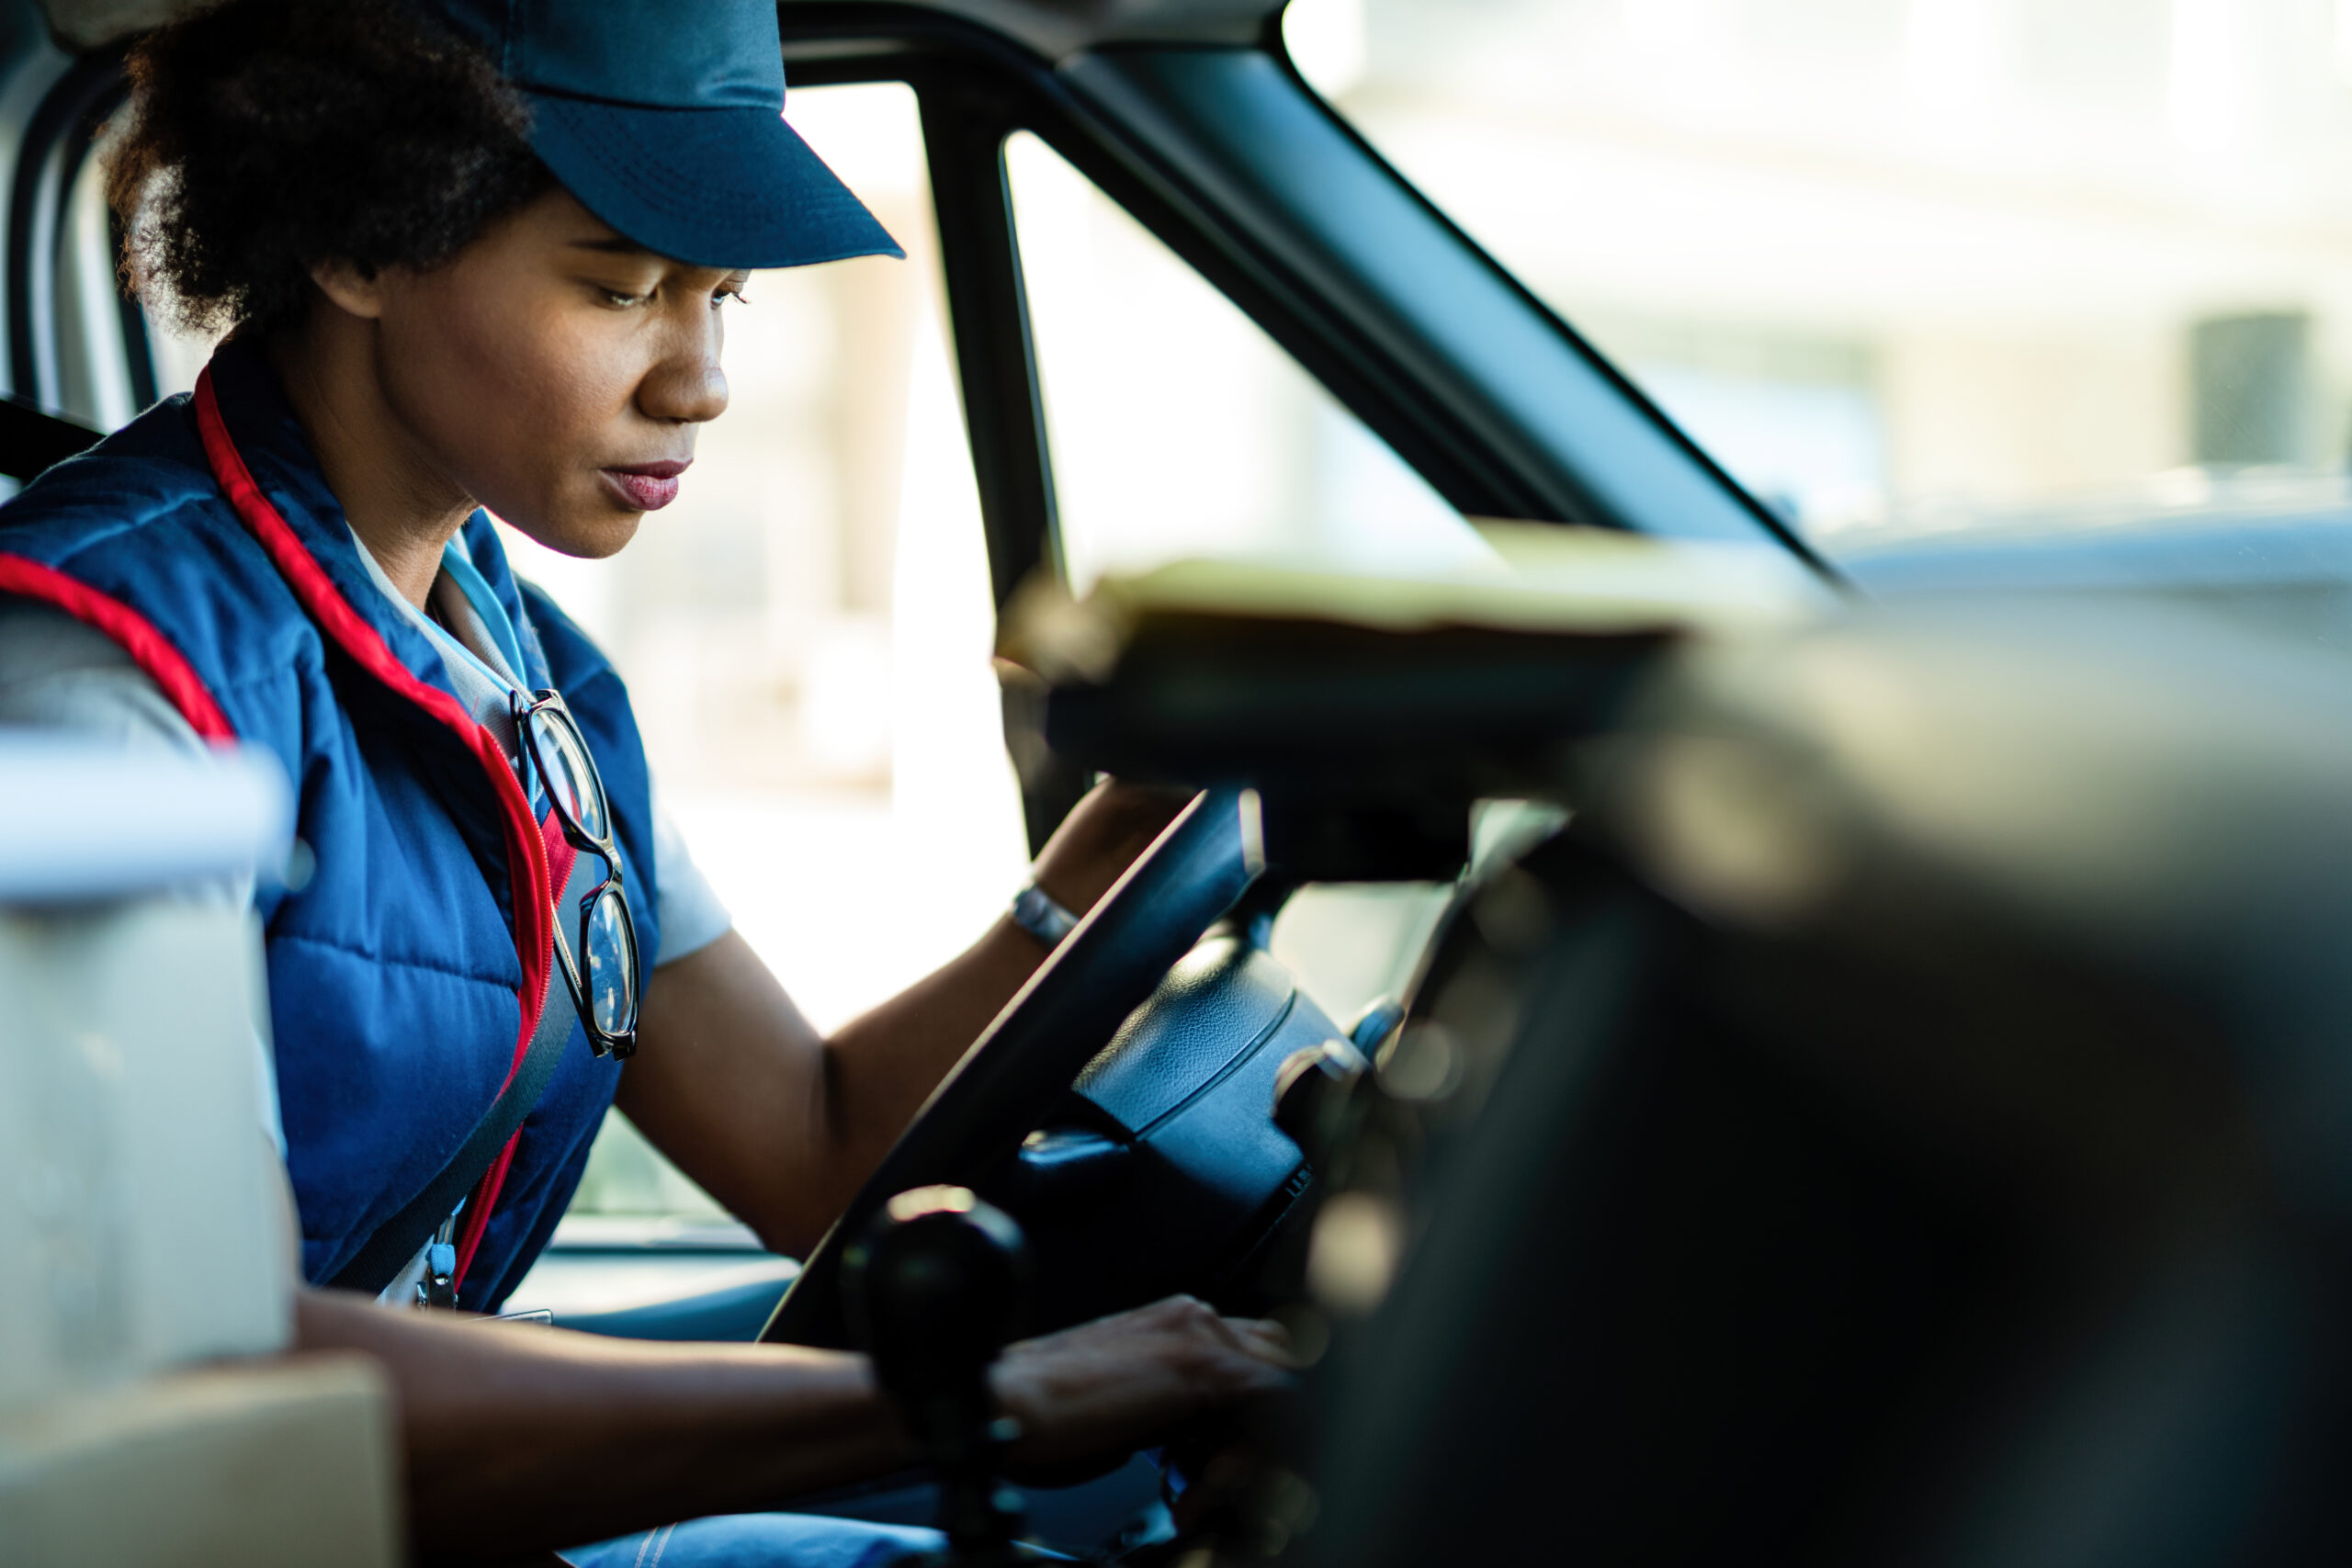 Today’s Transportation Industry Offering More Gender-Diverse Career Opportunities